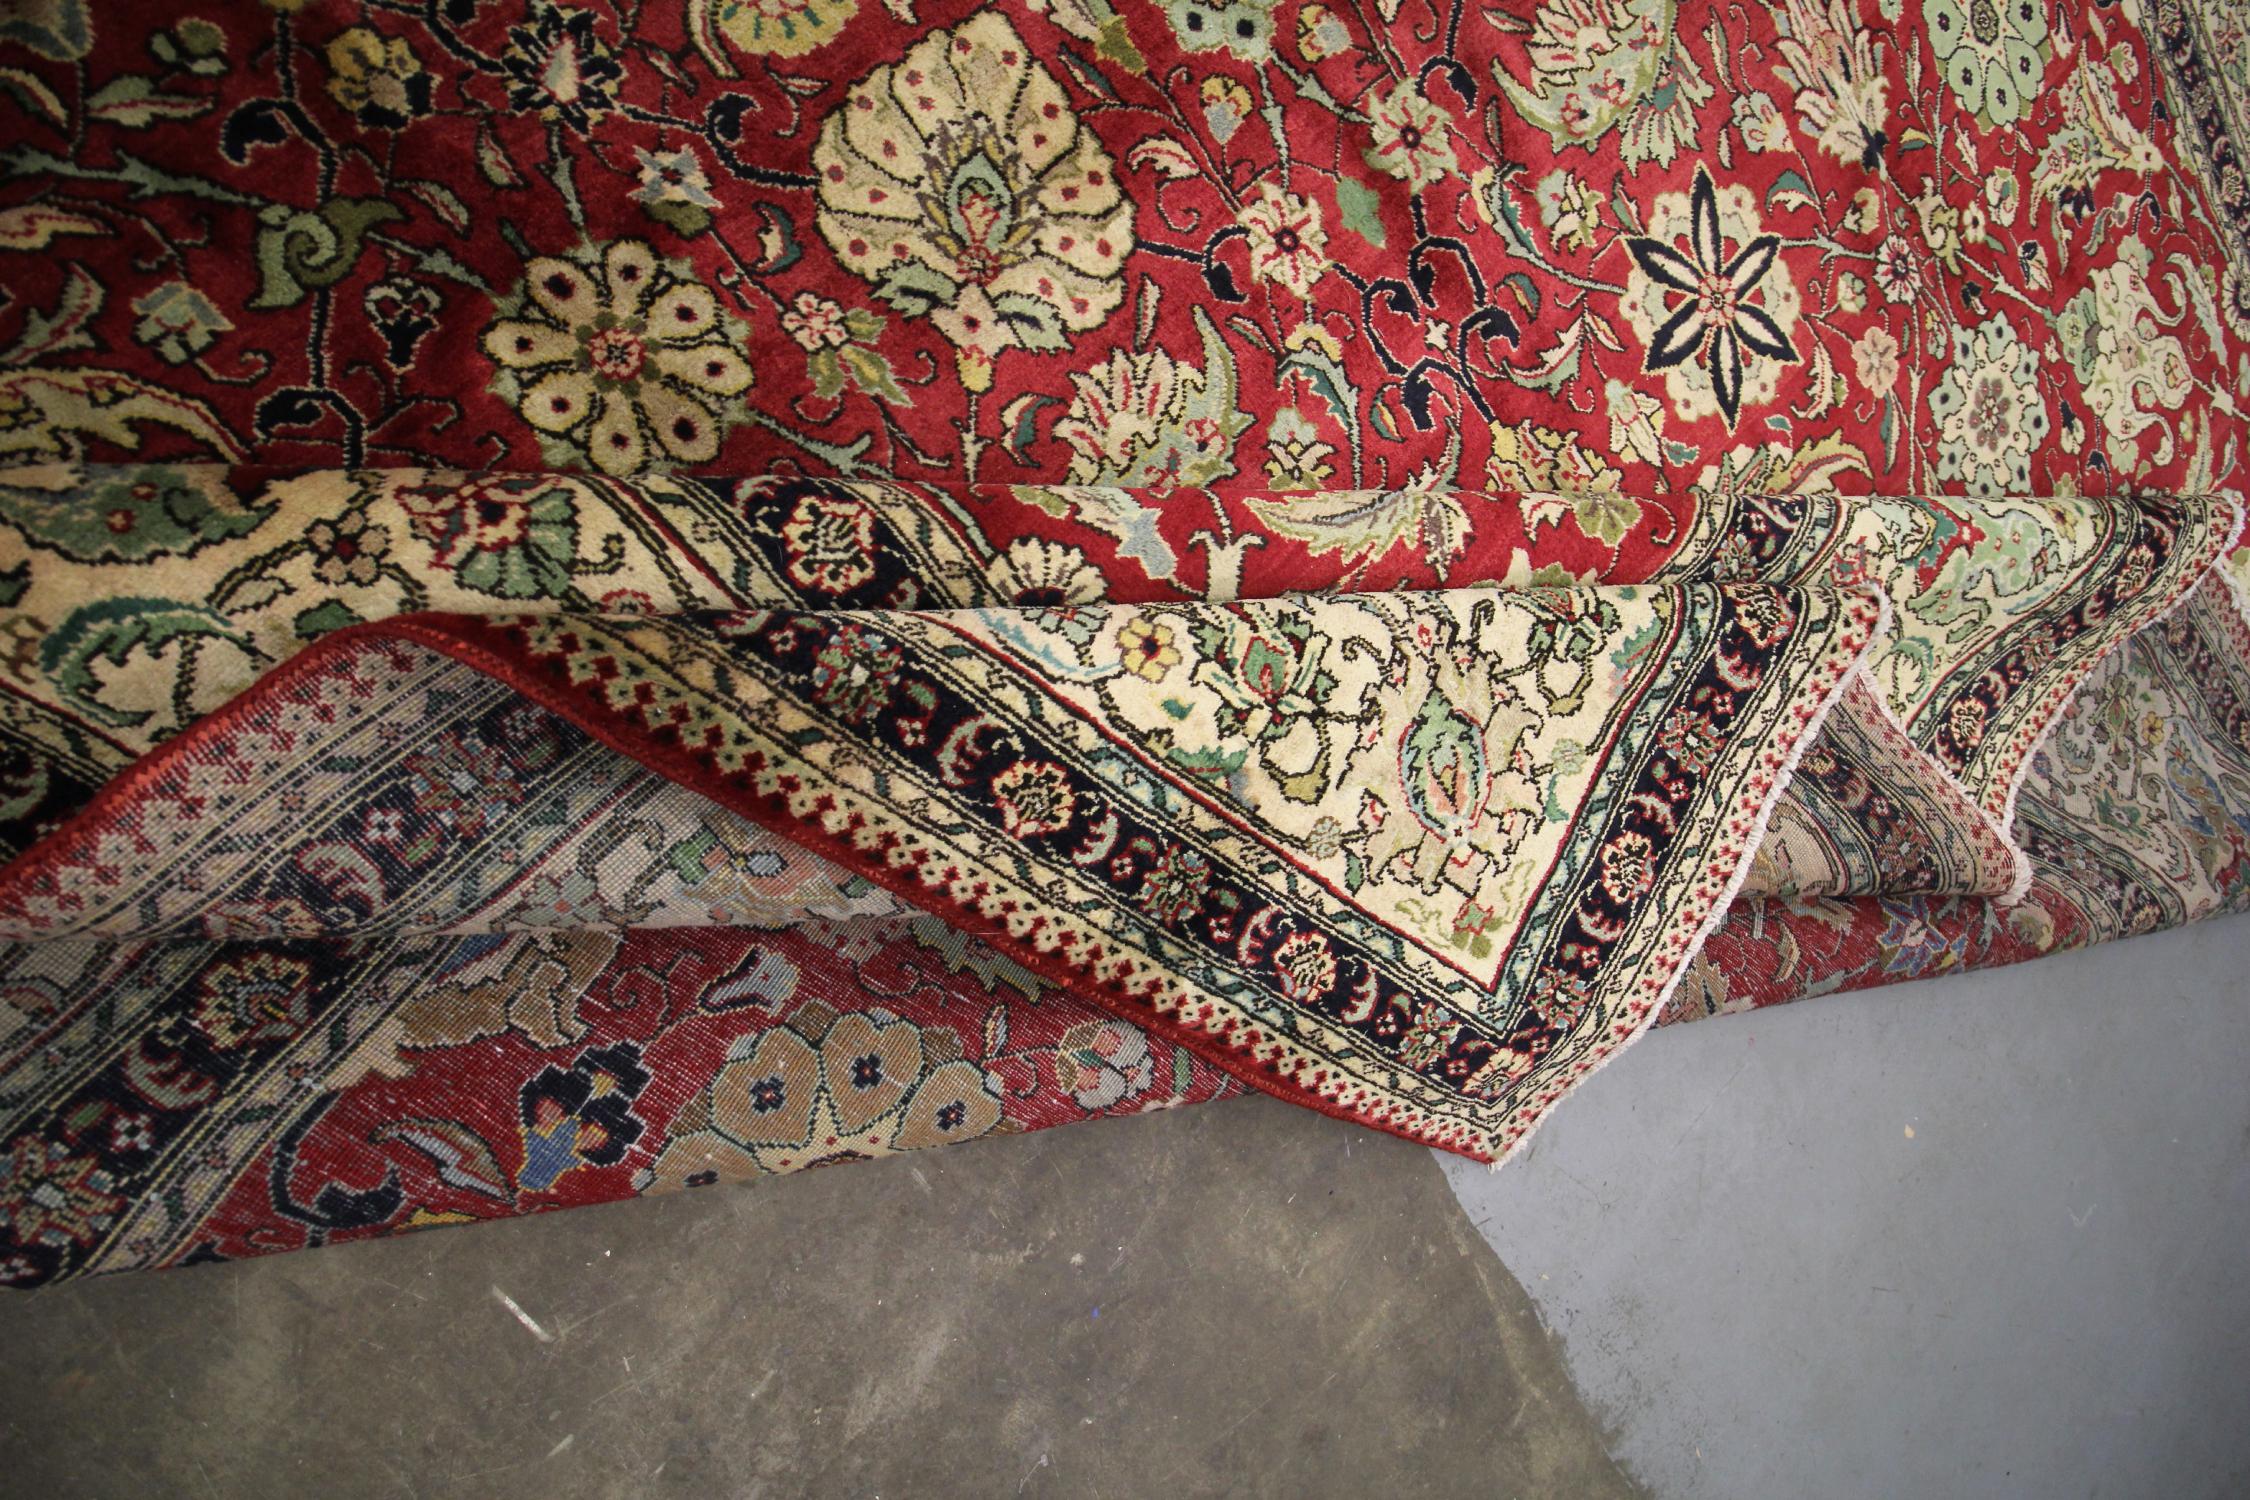 Large Vintage Rugs, Red All Over Carpet, Wool Living Room Rugs for Sale For Sale 4